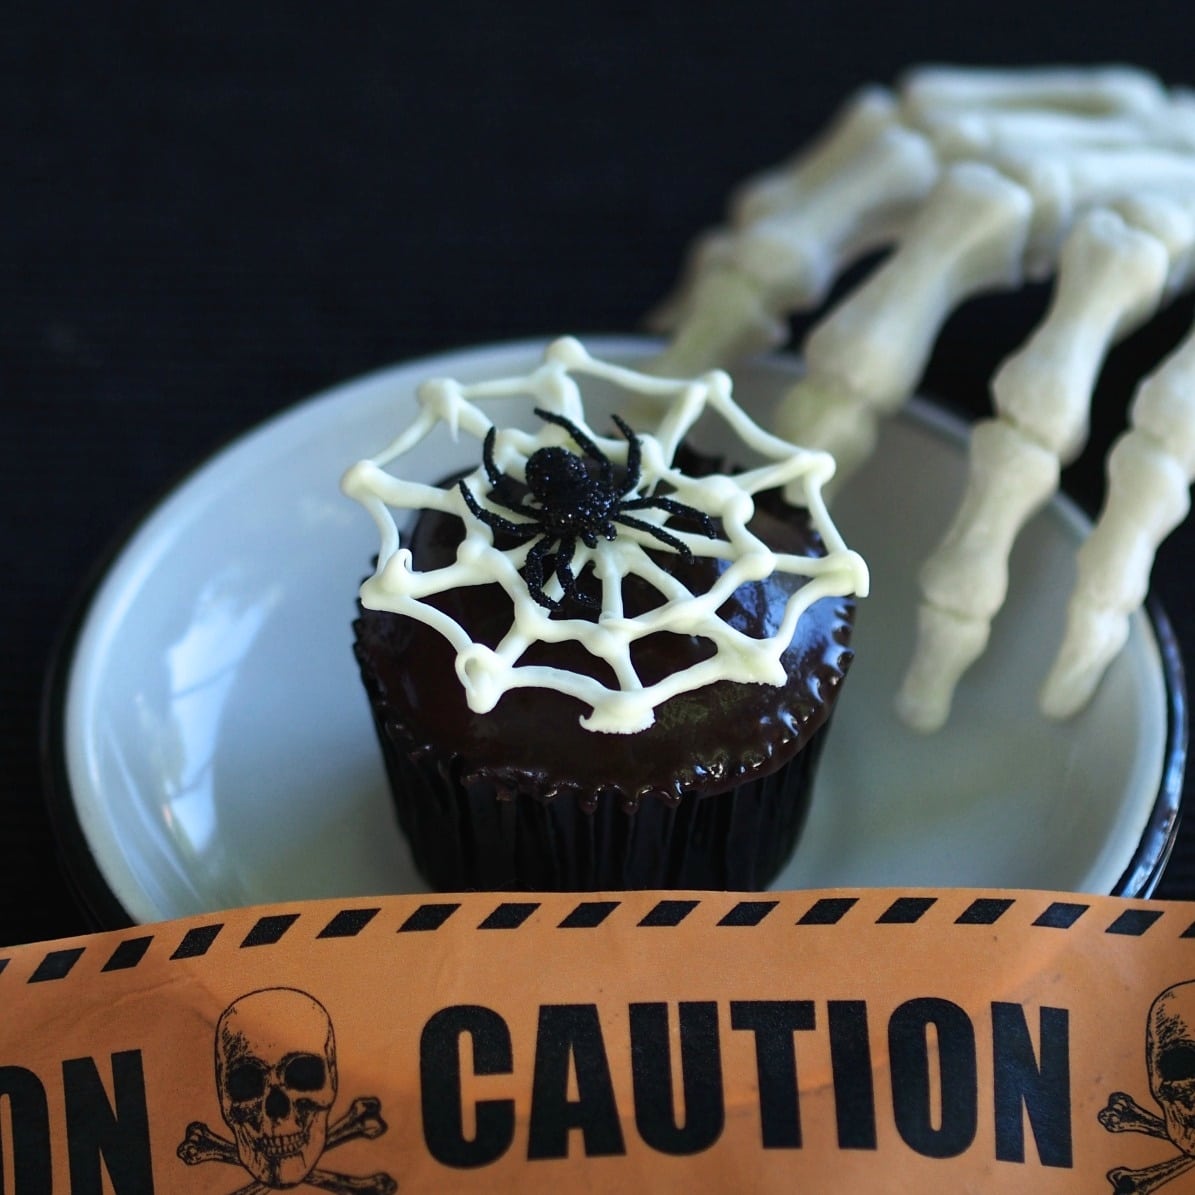 Spider Cupcake; use box cake mix & canned icing to make this easy & creepy, crawly Halloween treat. simplysated